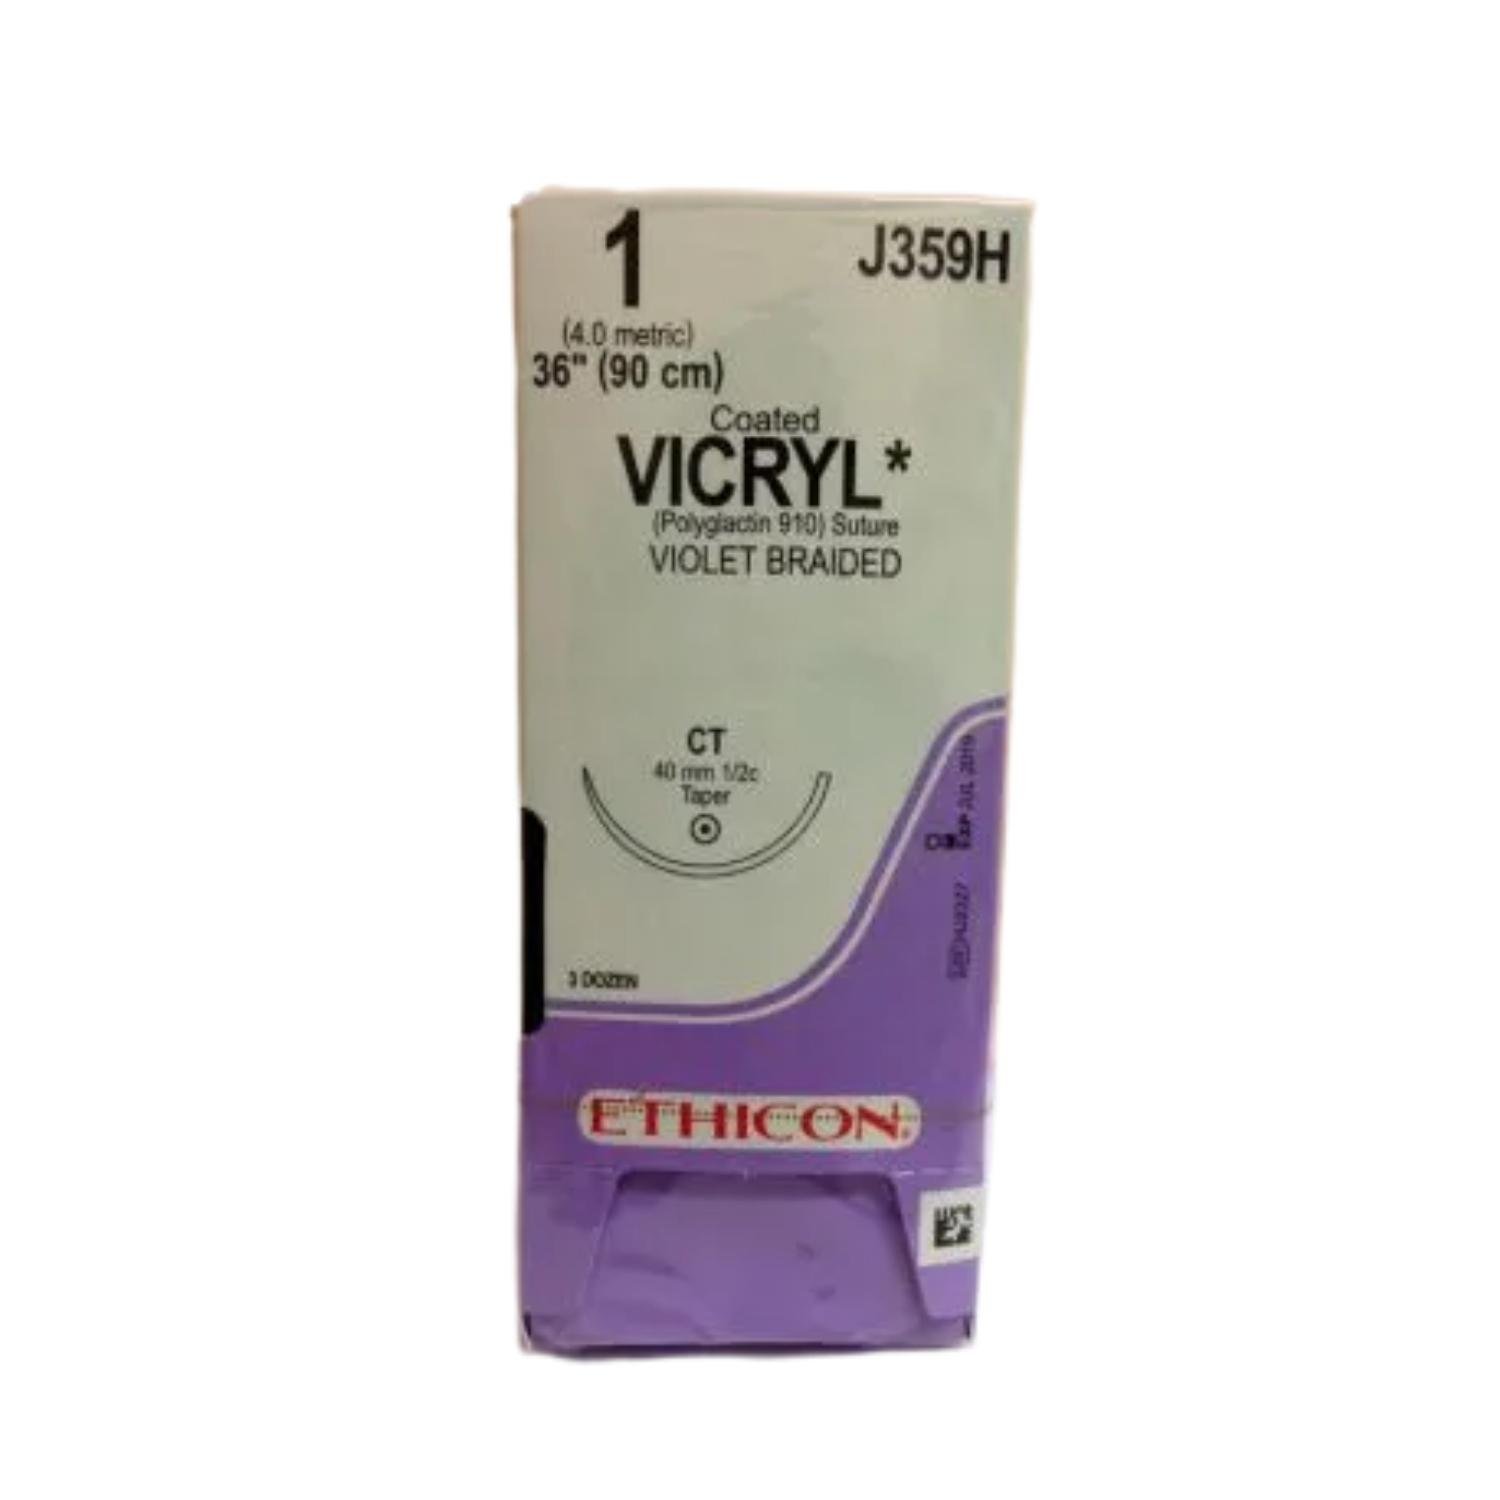 Ethicon Vicryl #1 Absorbable Violet Braided Suture